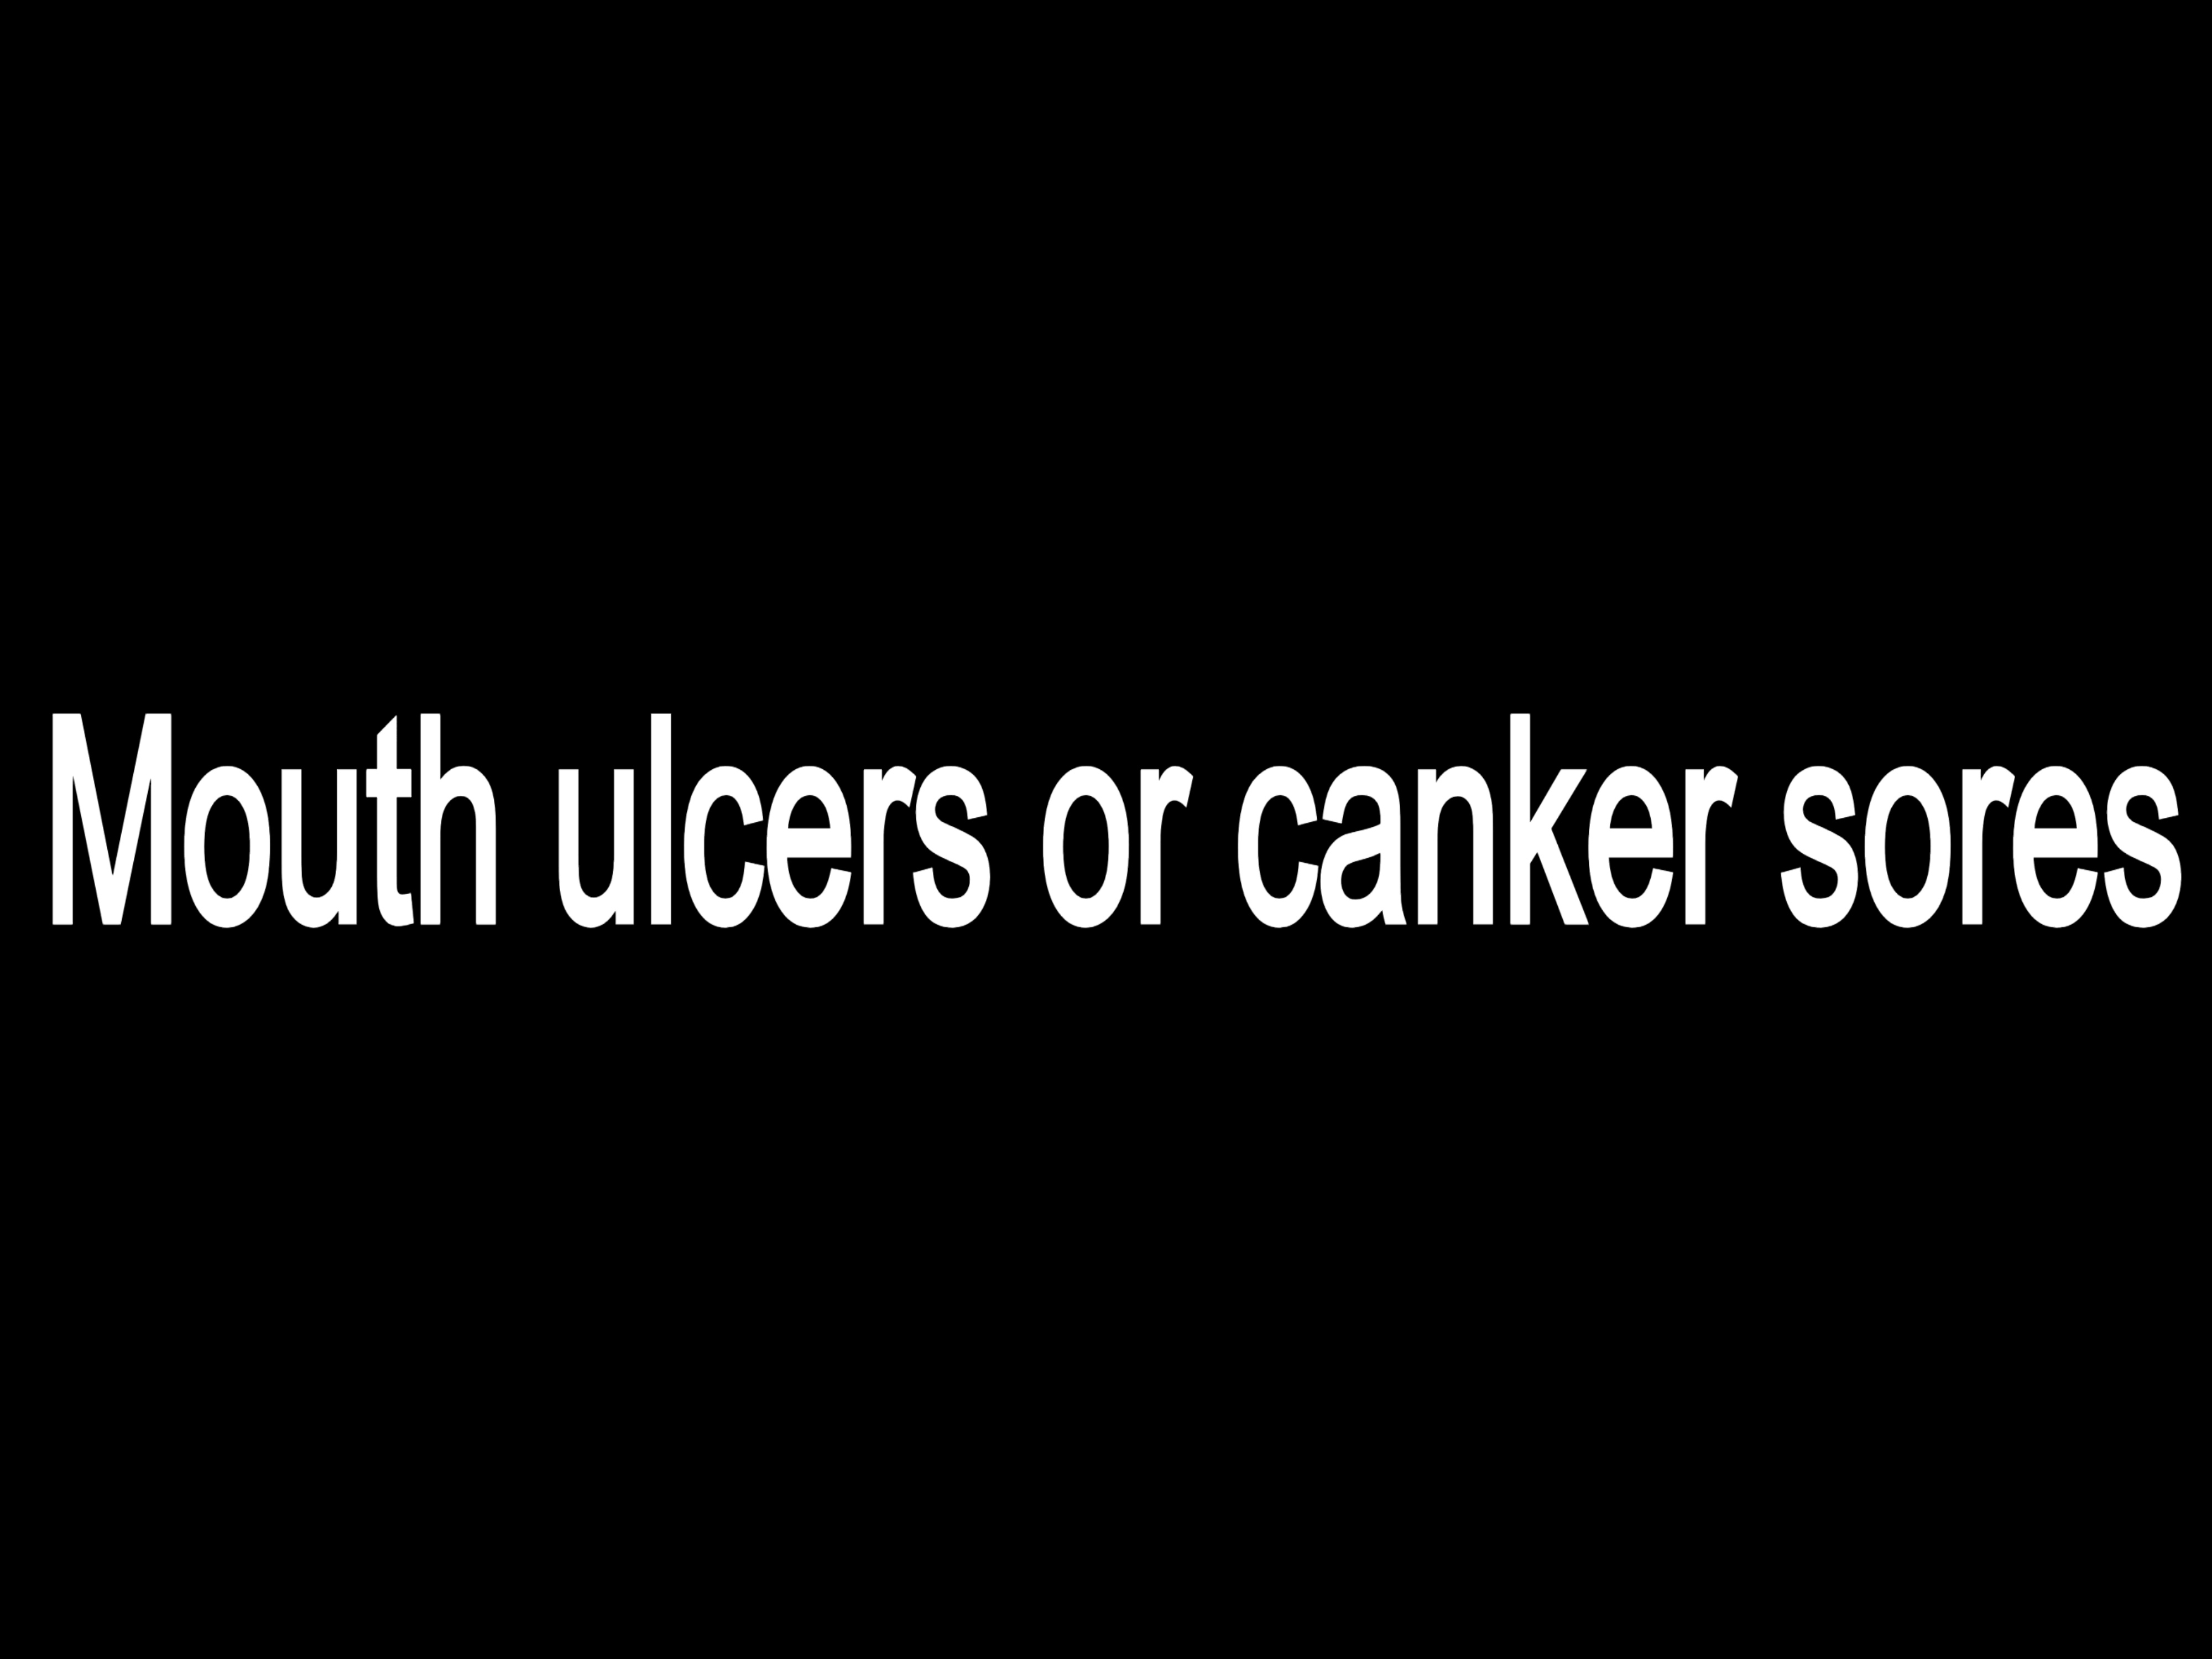 Mouth ulcers or canker sores